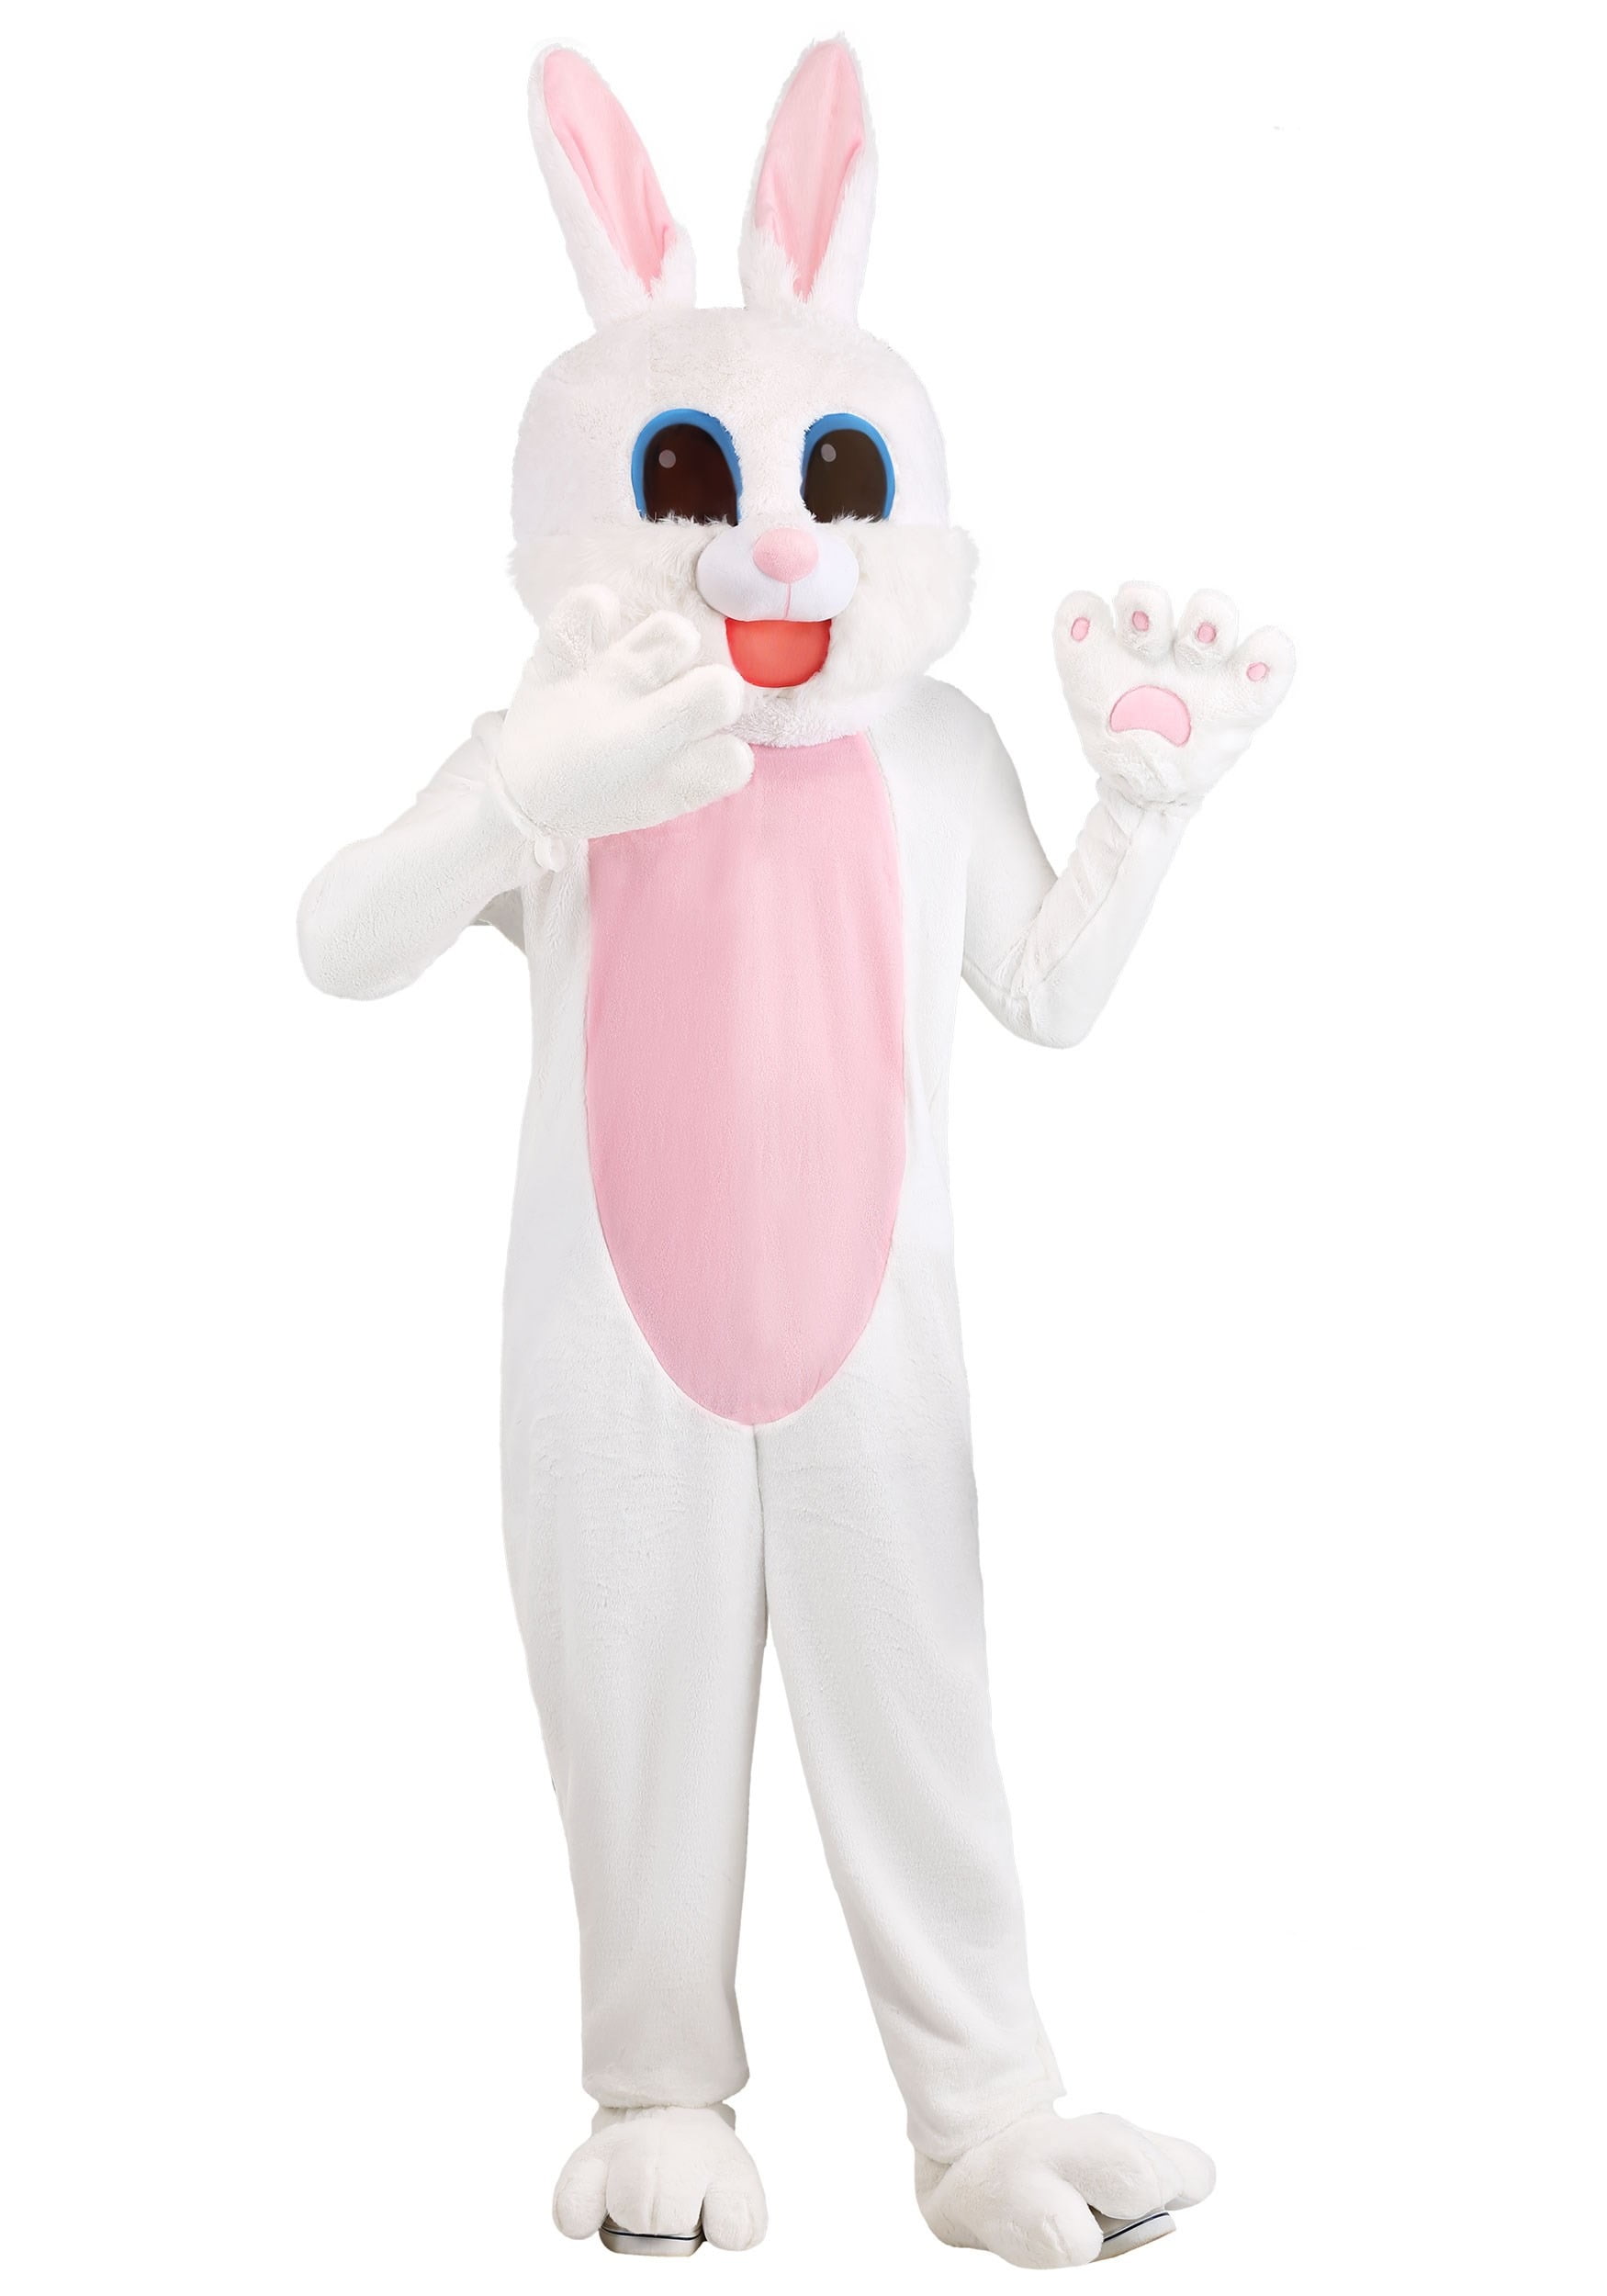 Details about   Bunny Mascot Costume Cosplay Party Game Dress Outfit Advertising Halloween Adult 